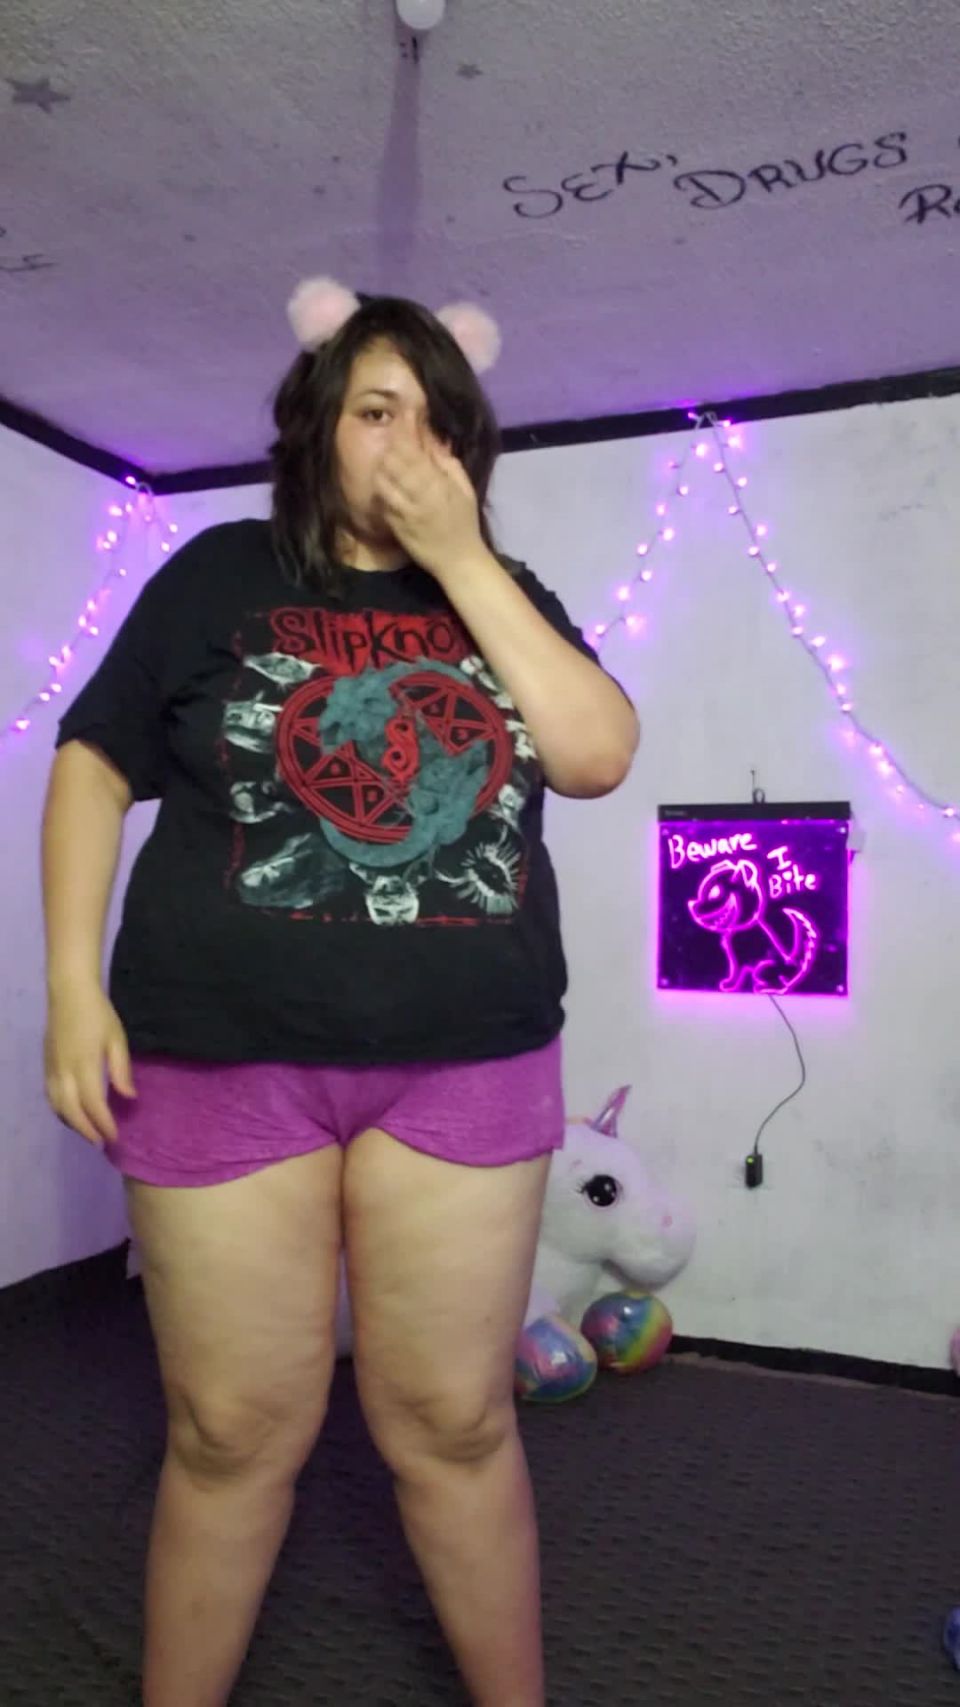 Onlyfans - Violetwitchy - Fatty dancing   would you wanna see more clips like this one - 20-01-2020